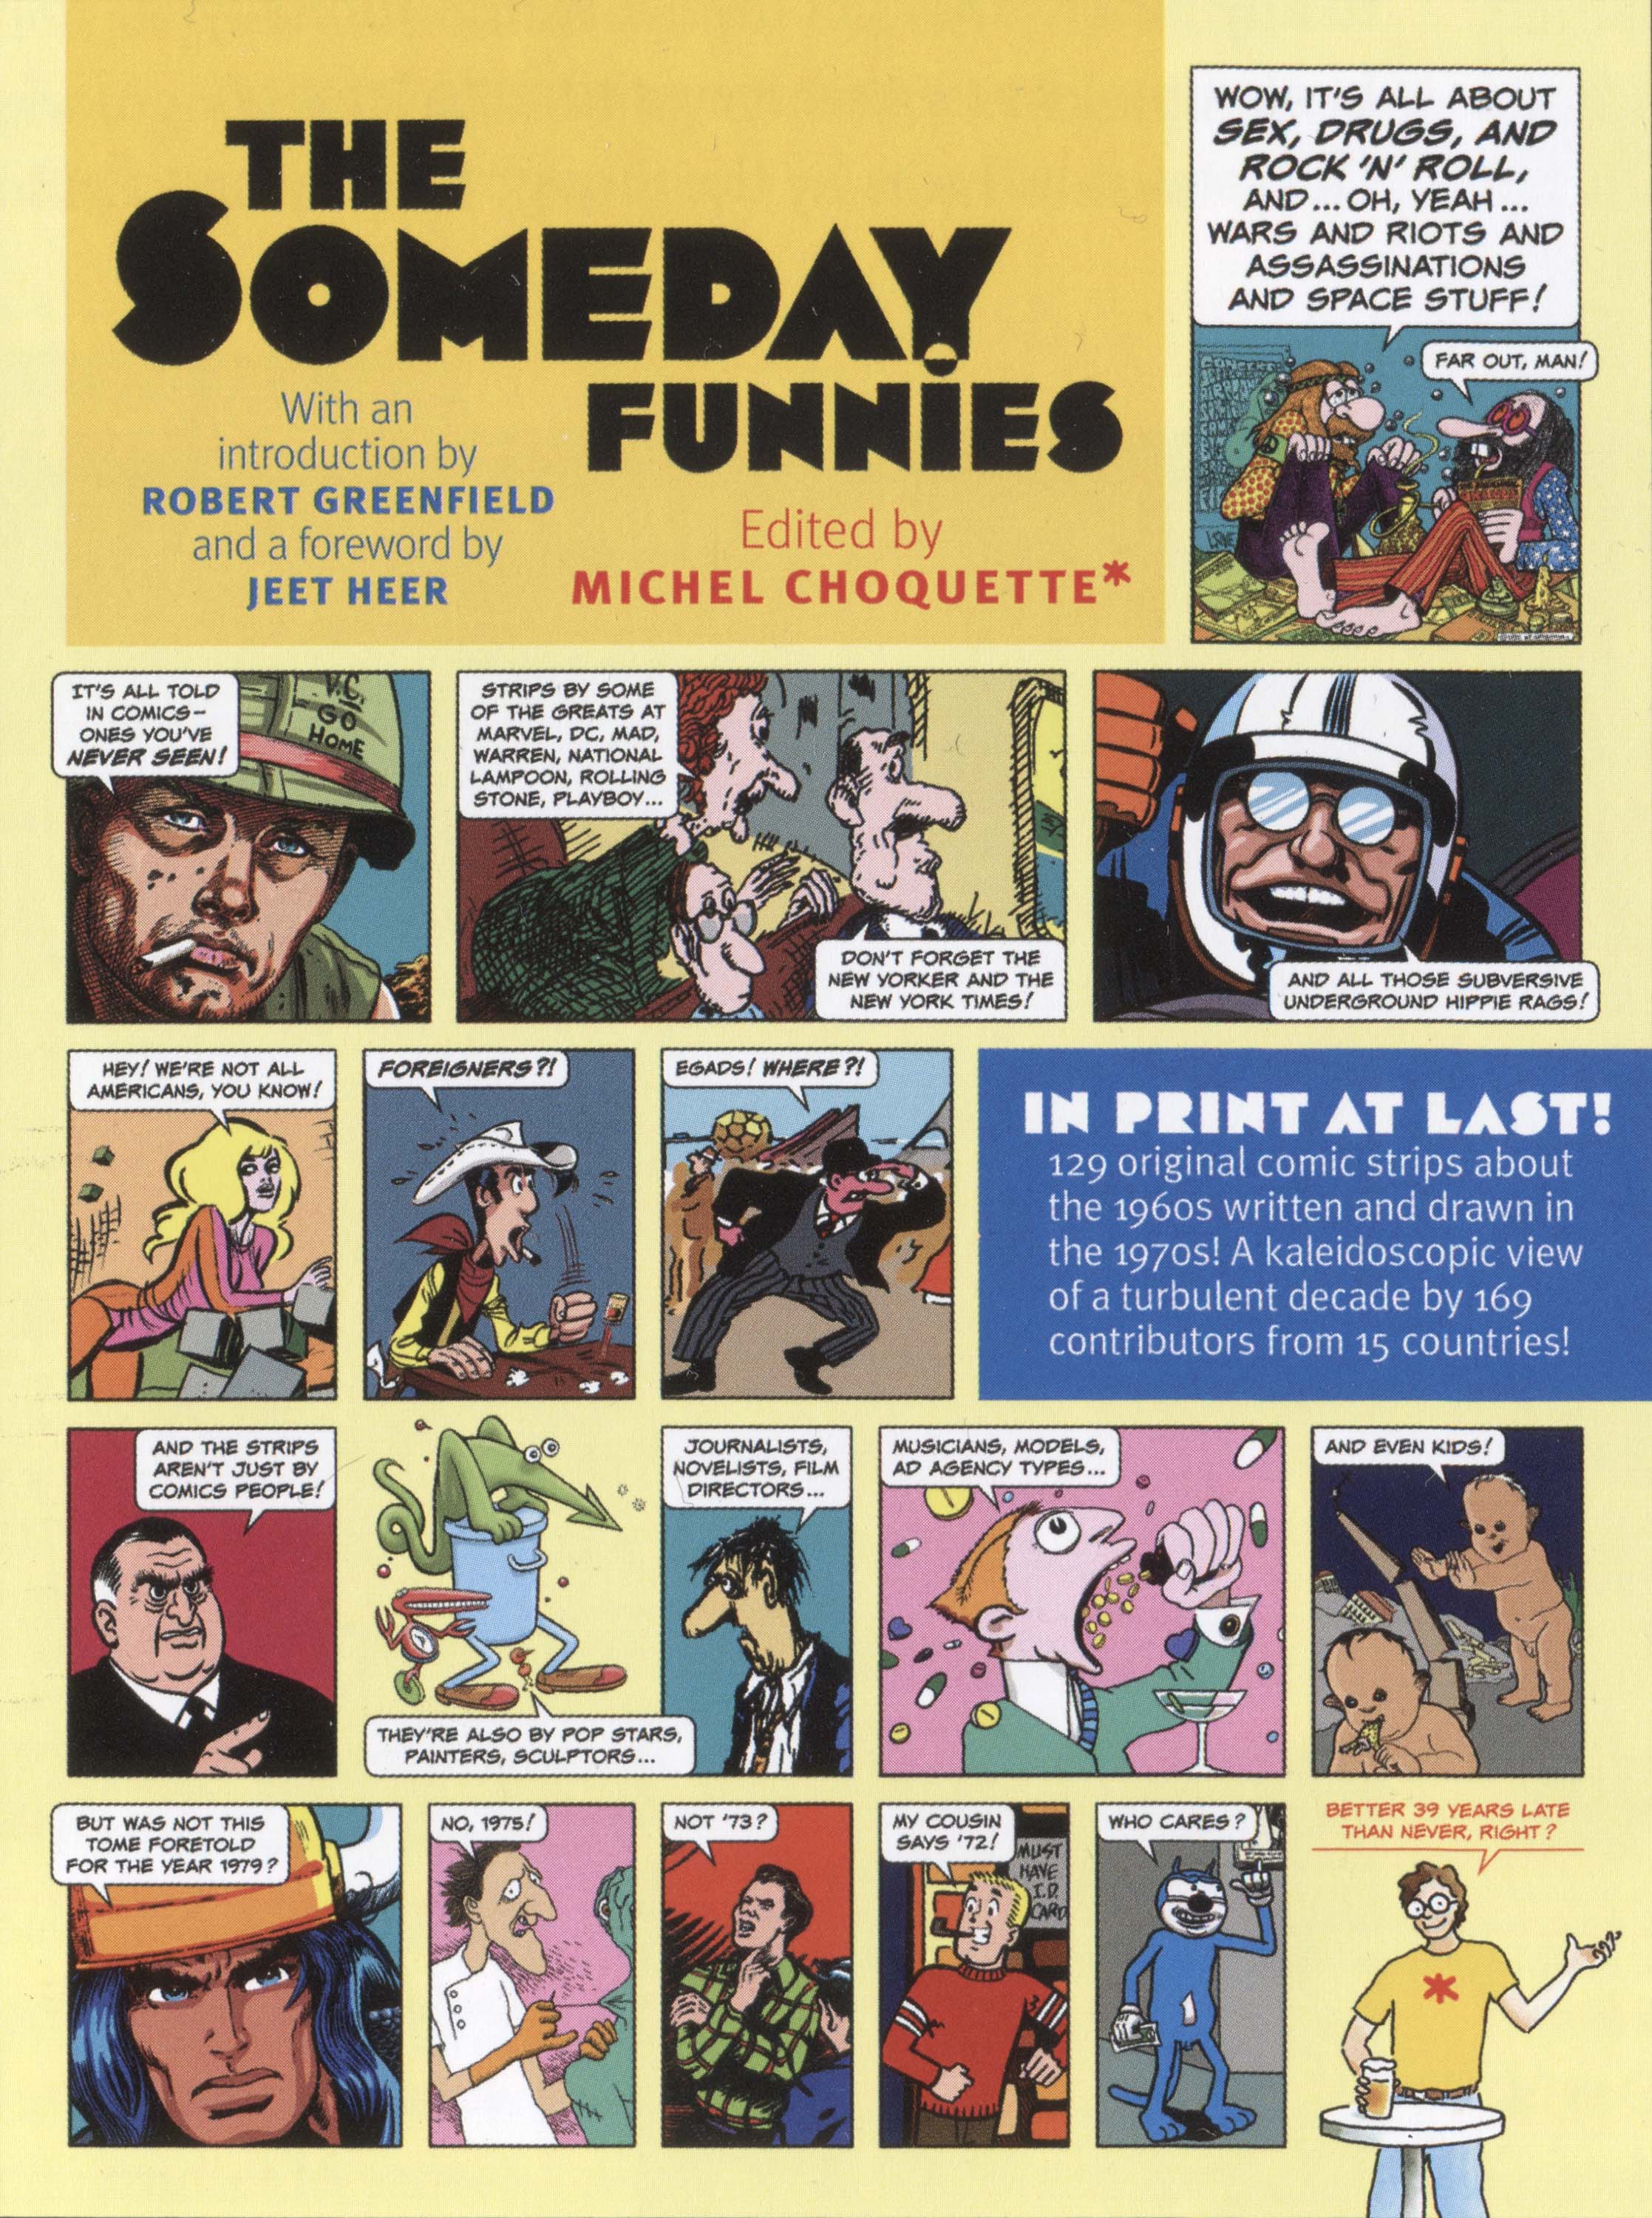 The Someday Funnies, cover